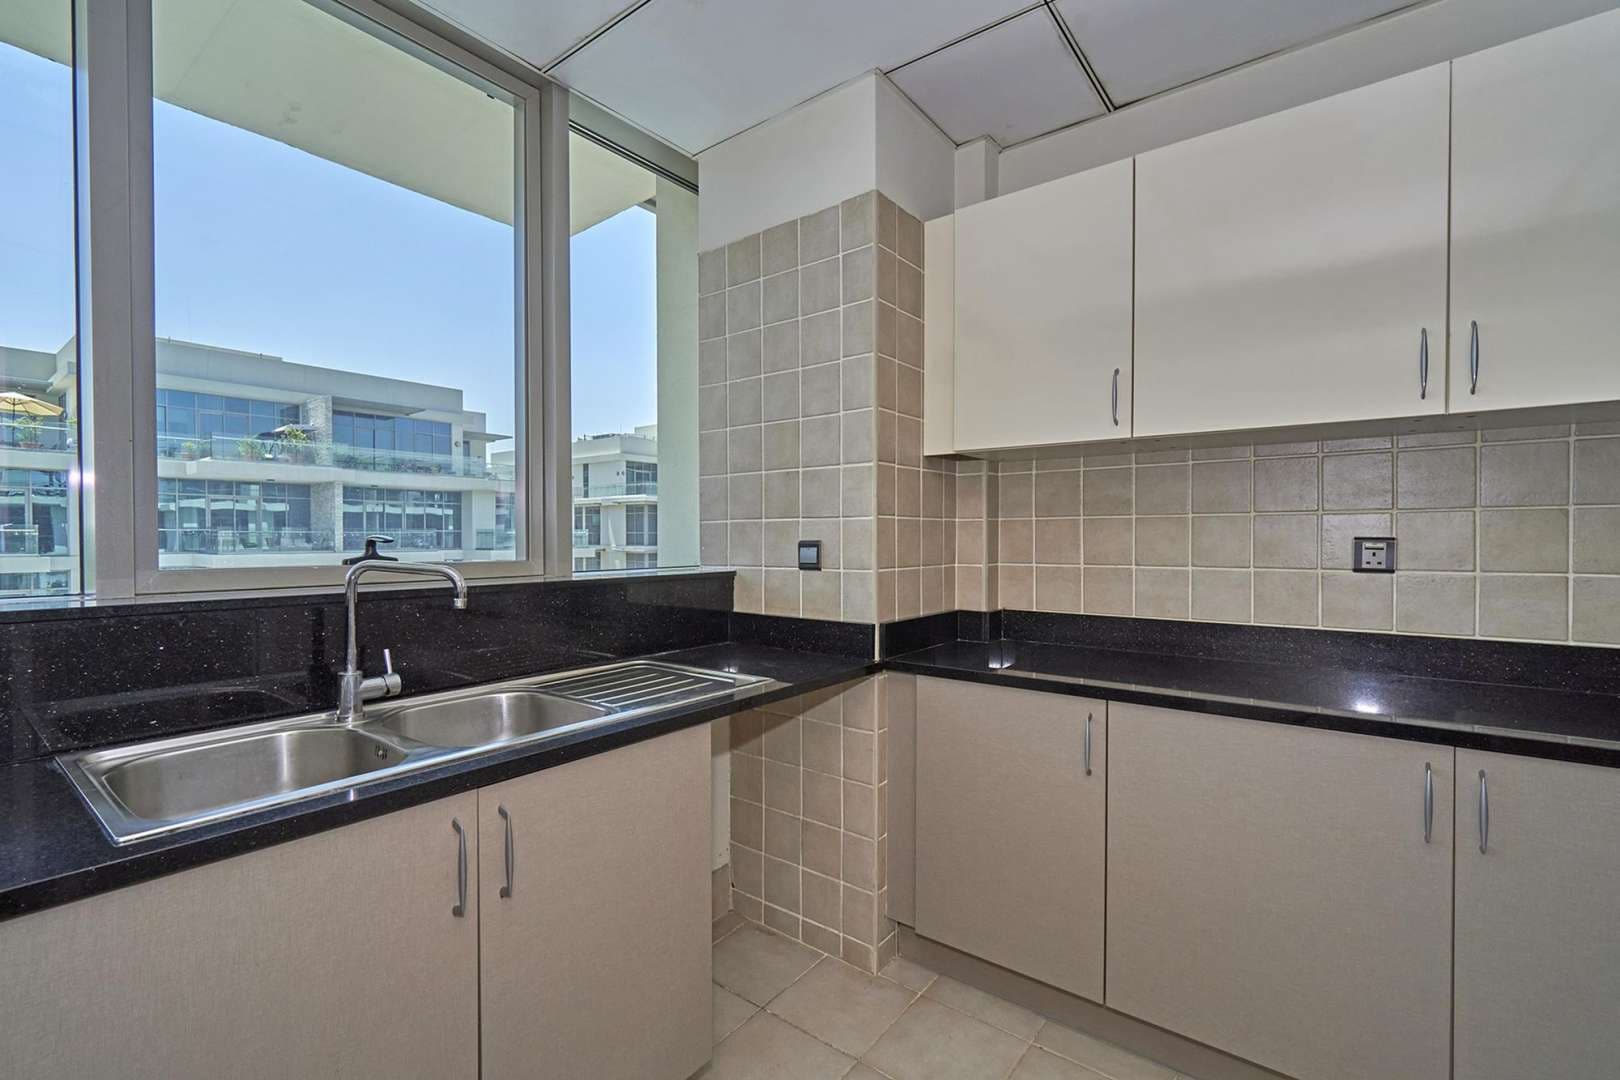 2 Bedroom Apartment For Rent The Polo Residence Lp06380 1815e76676c3380.jpg